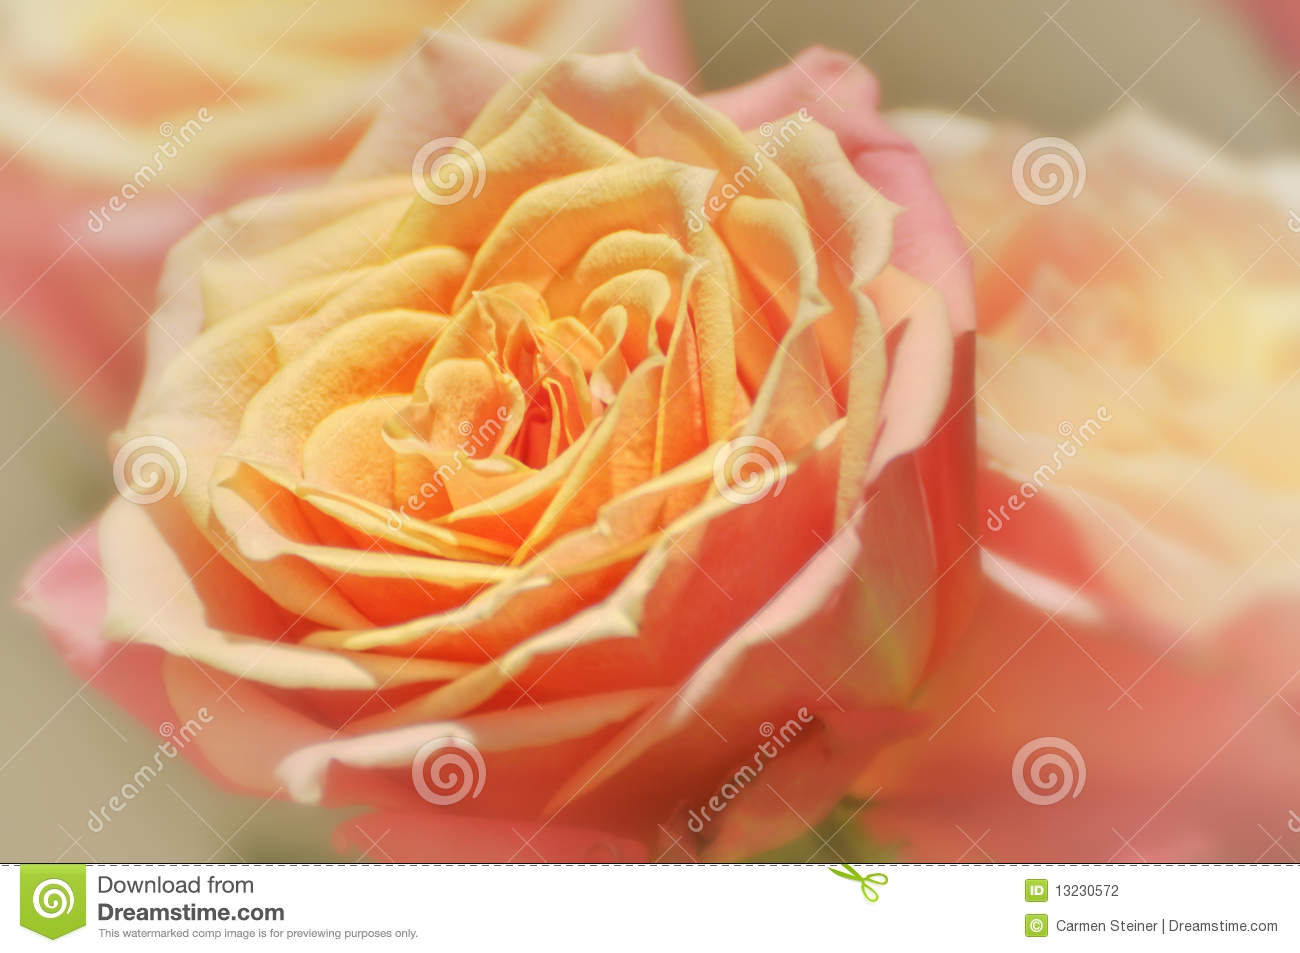 Peach Colored Rose Stock Photography   Image  13230572